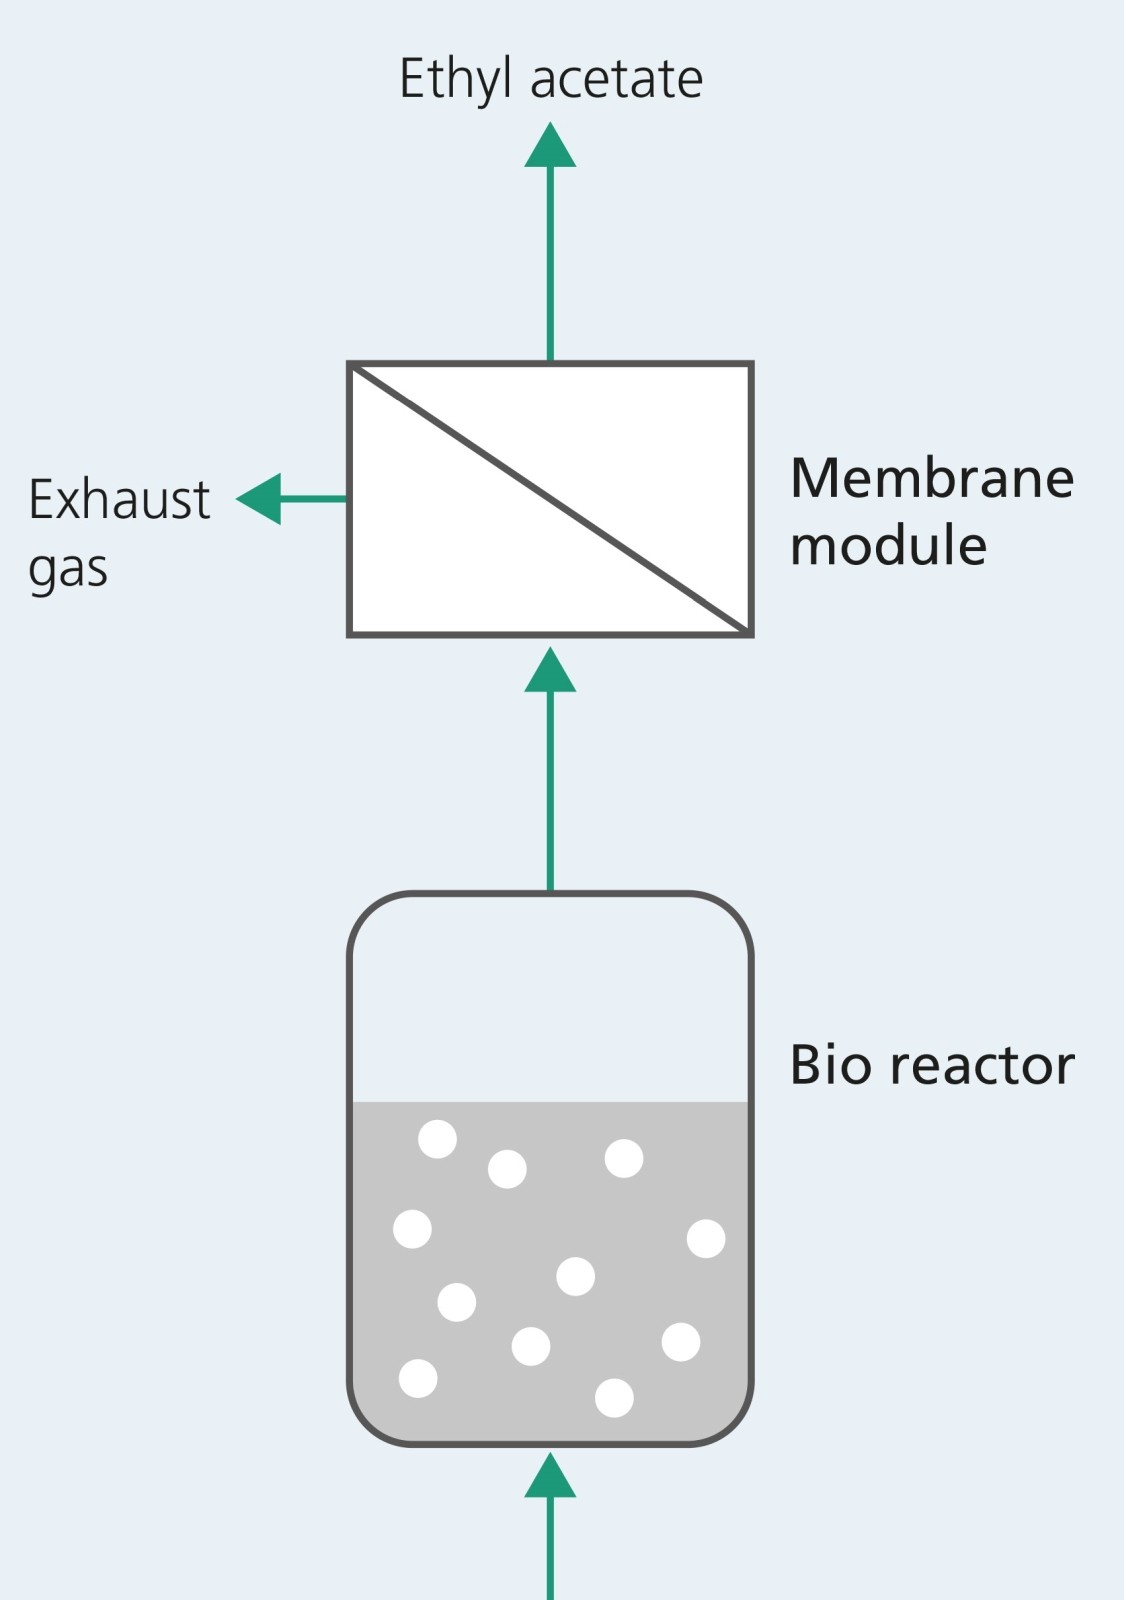 After the molasses are fermented in the bioreactor, the resulting gas-vapor mixture is passed through a mem-brane module and the valuable ethyl acetate is separated.